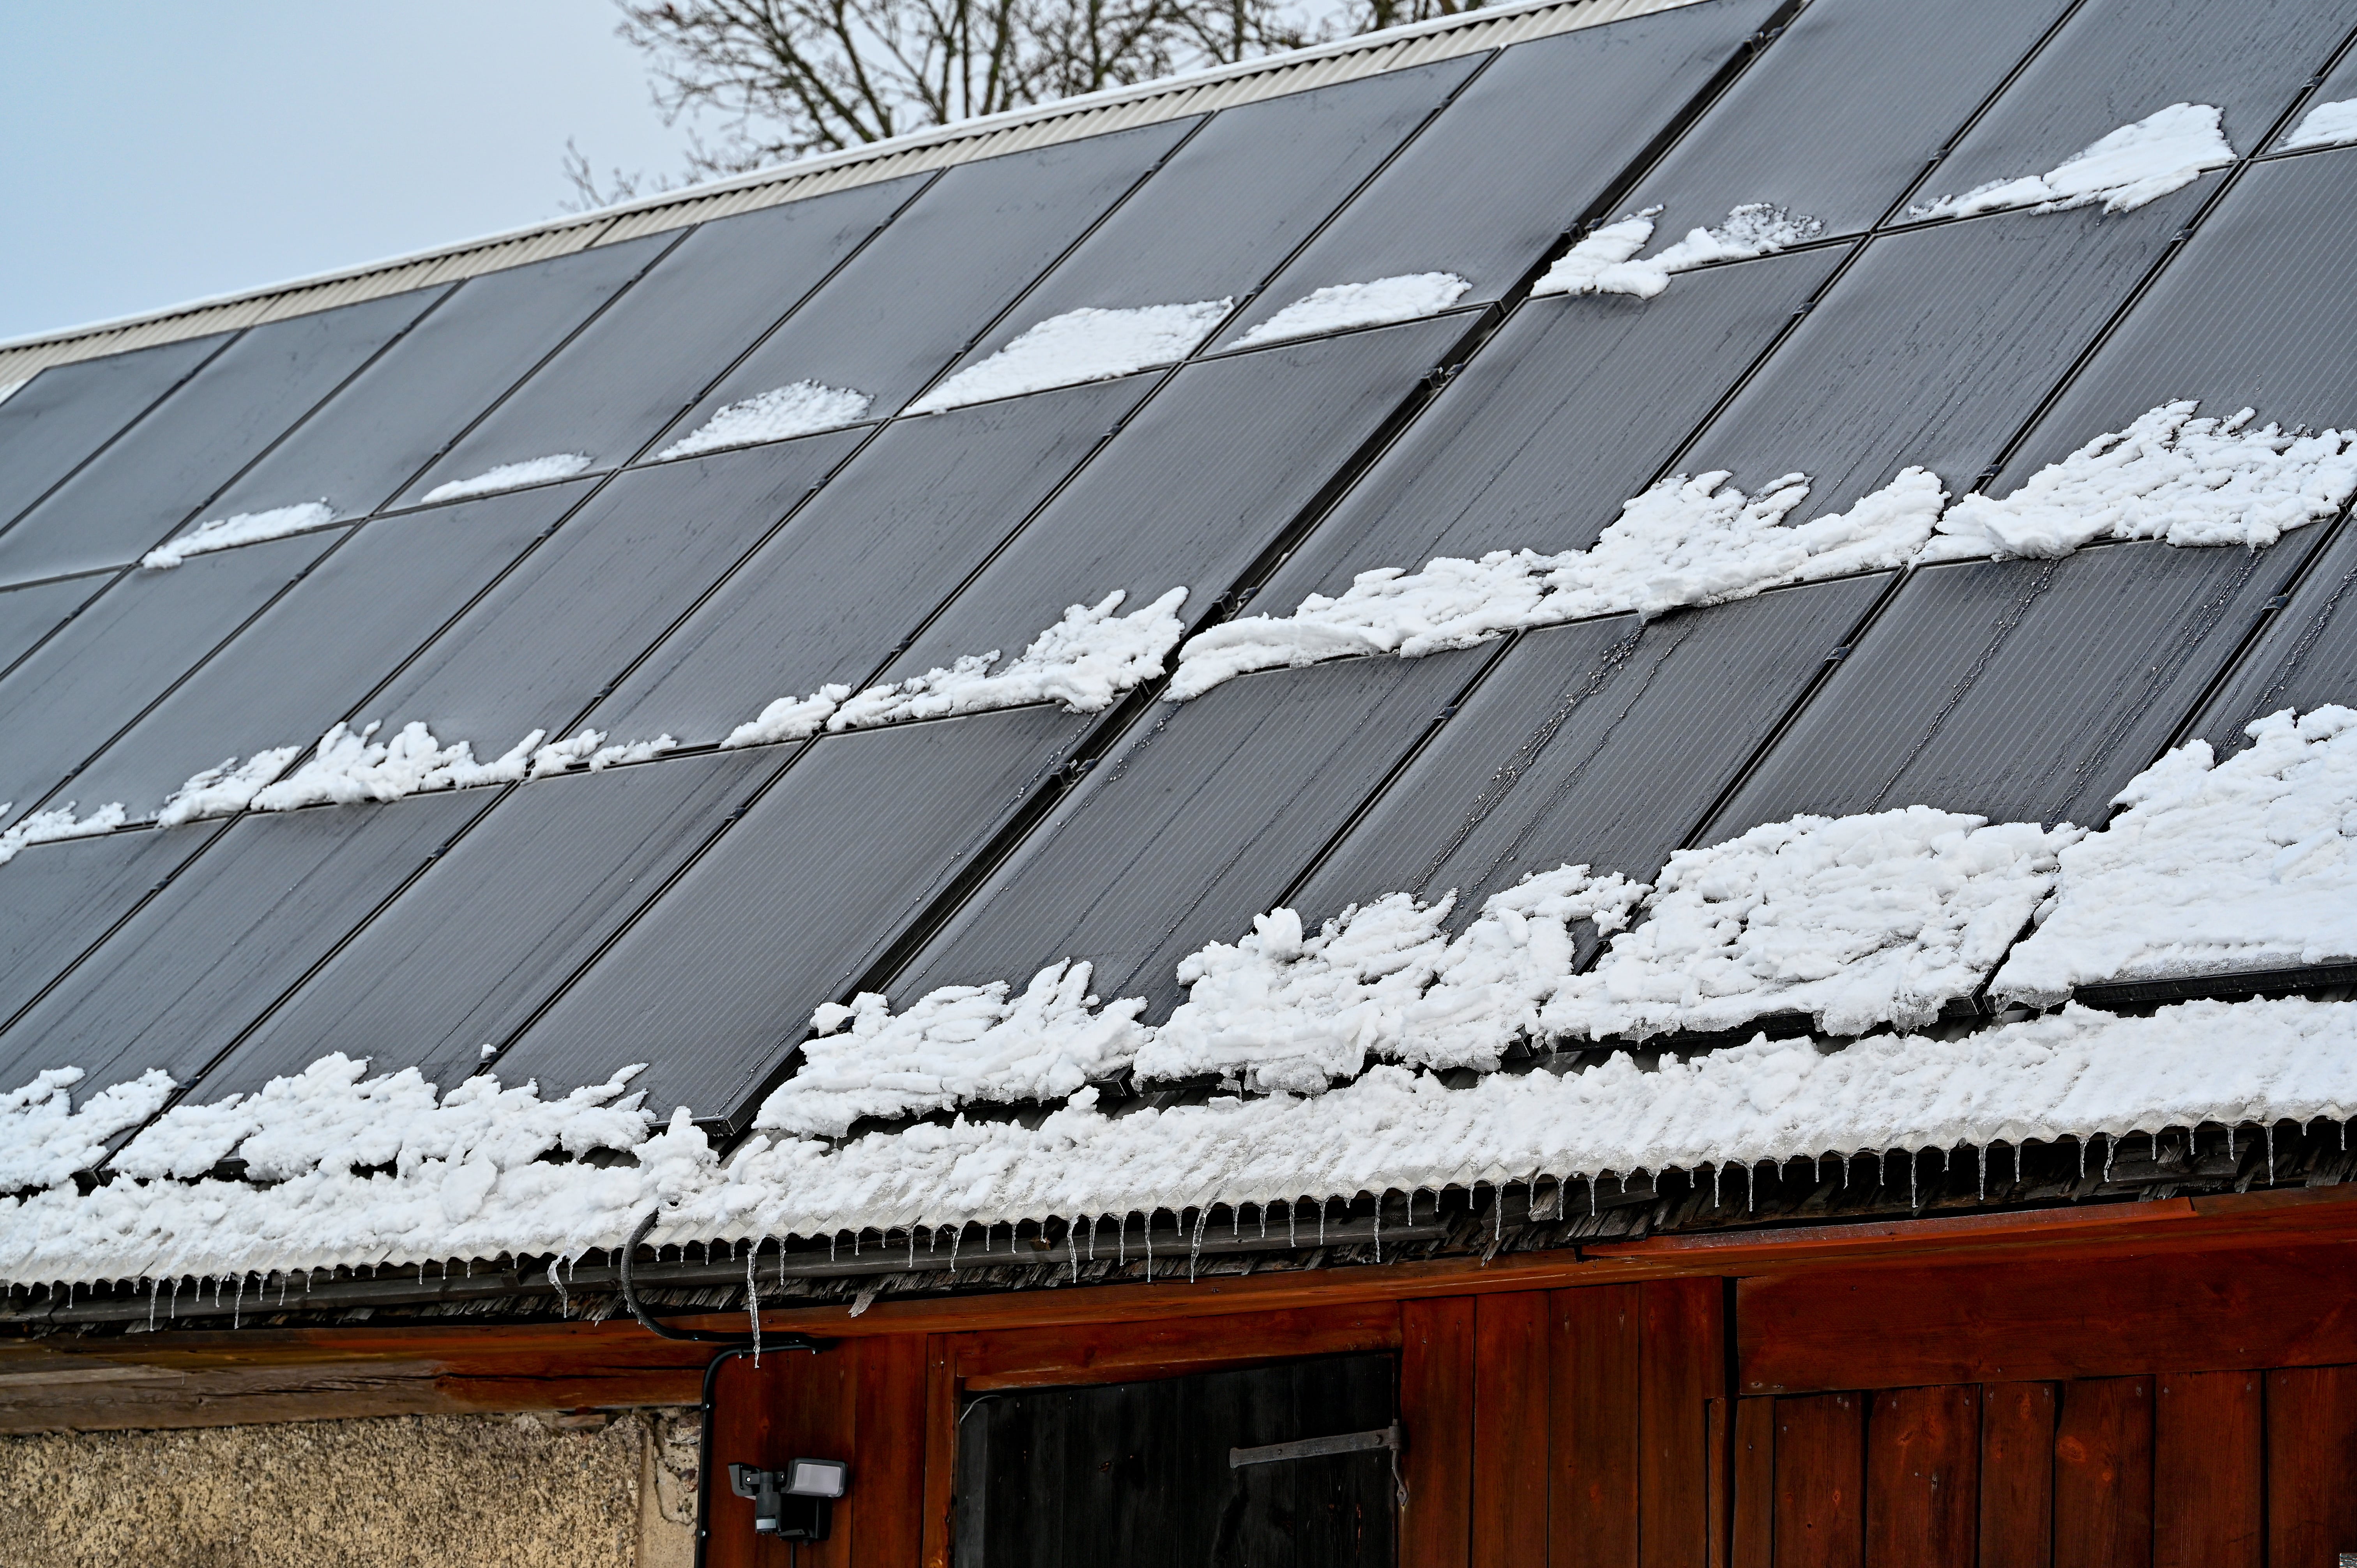 Winter roof with solar panels and light snow